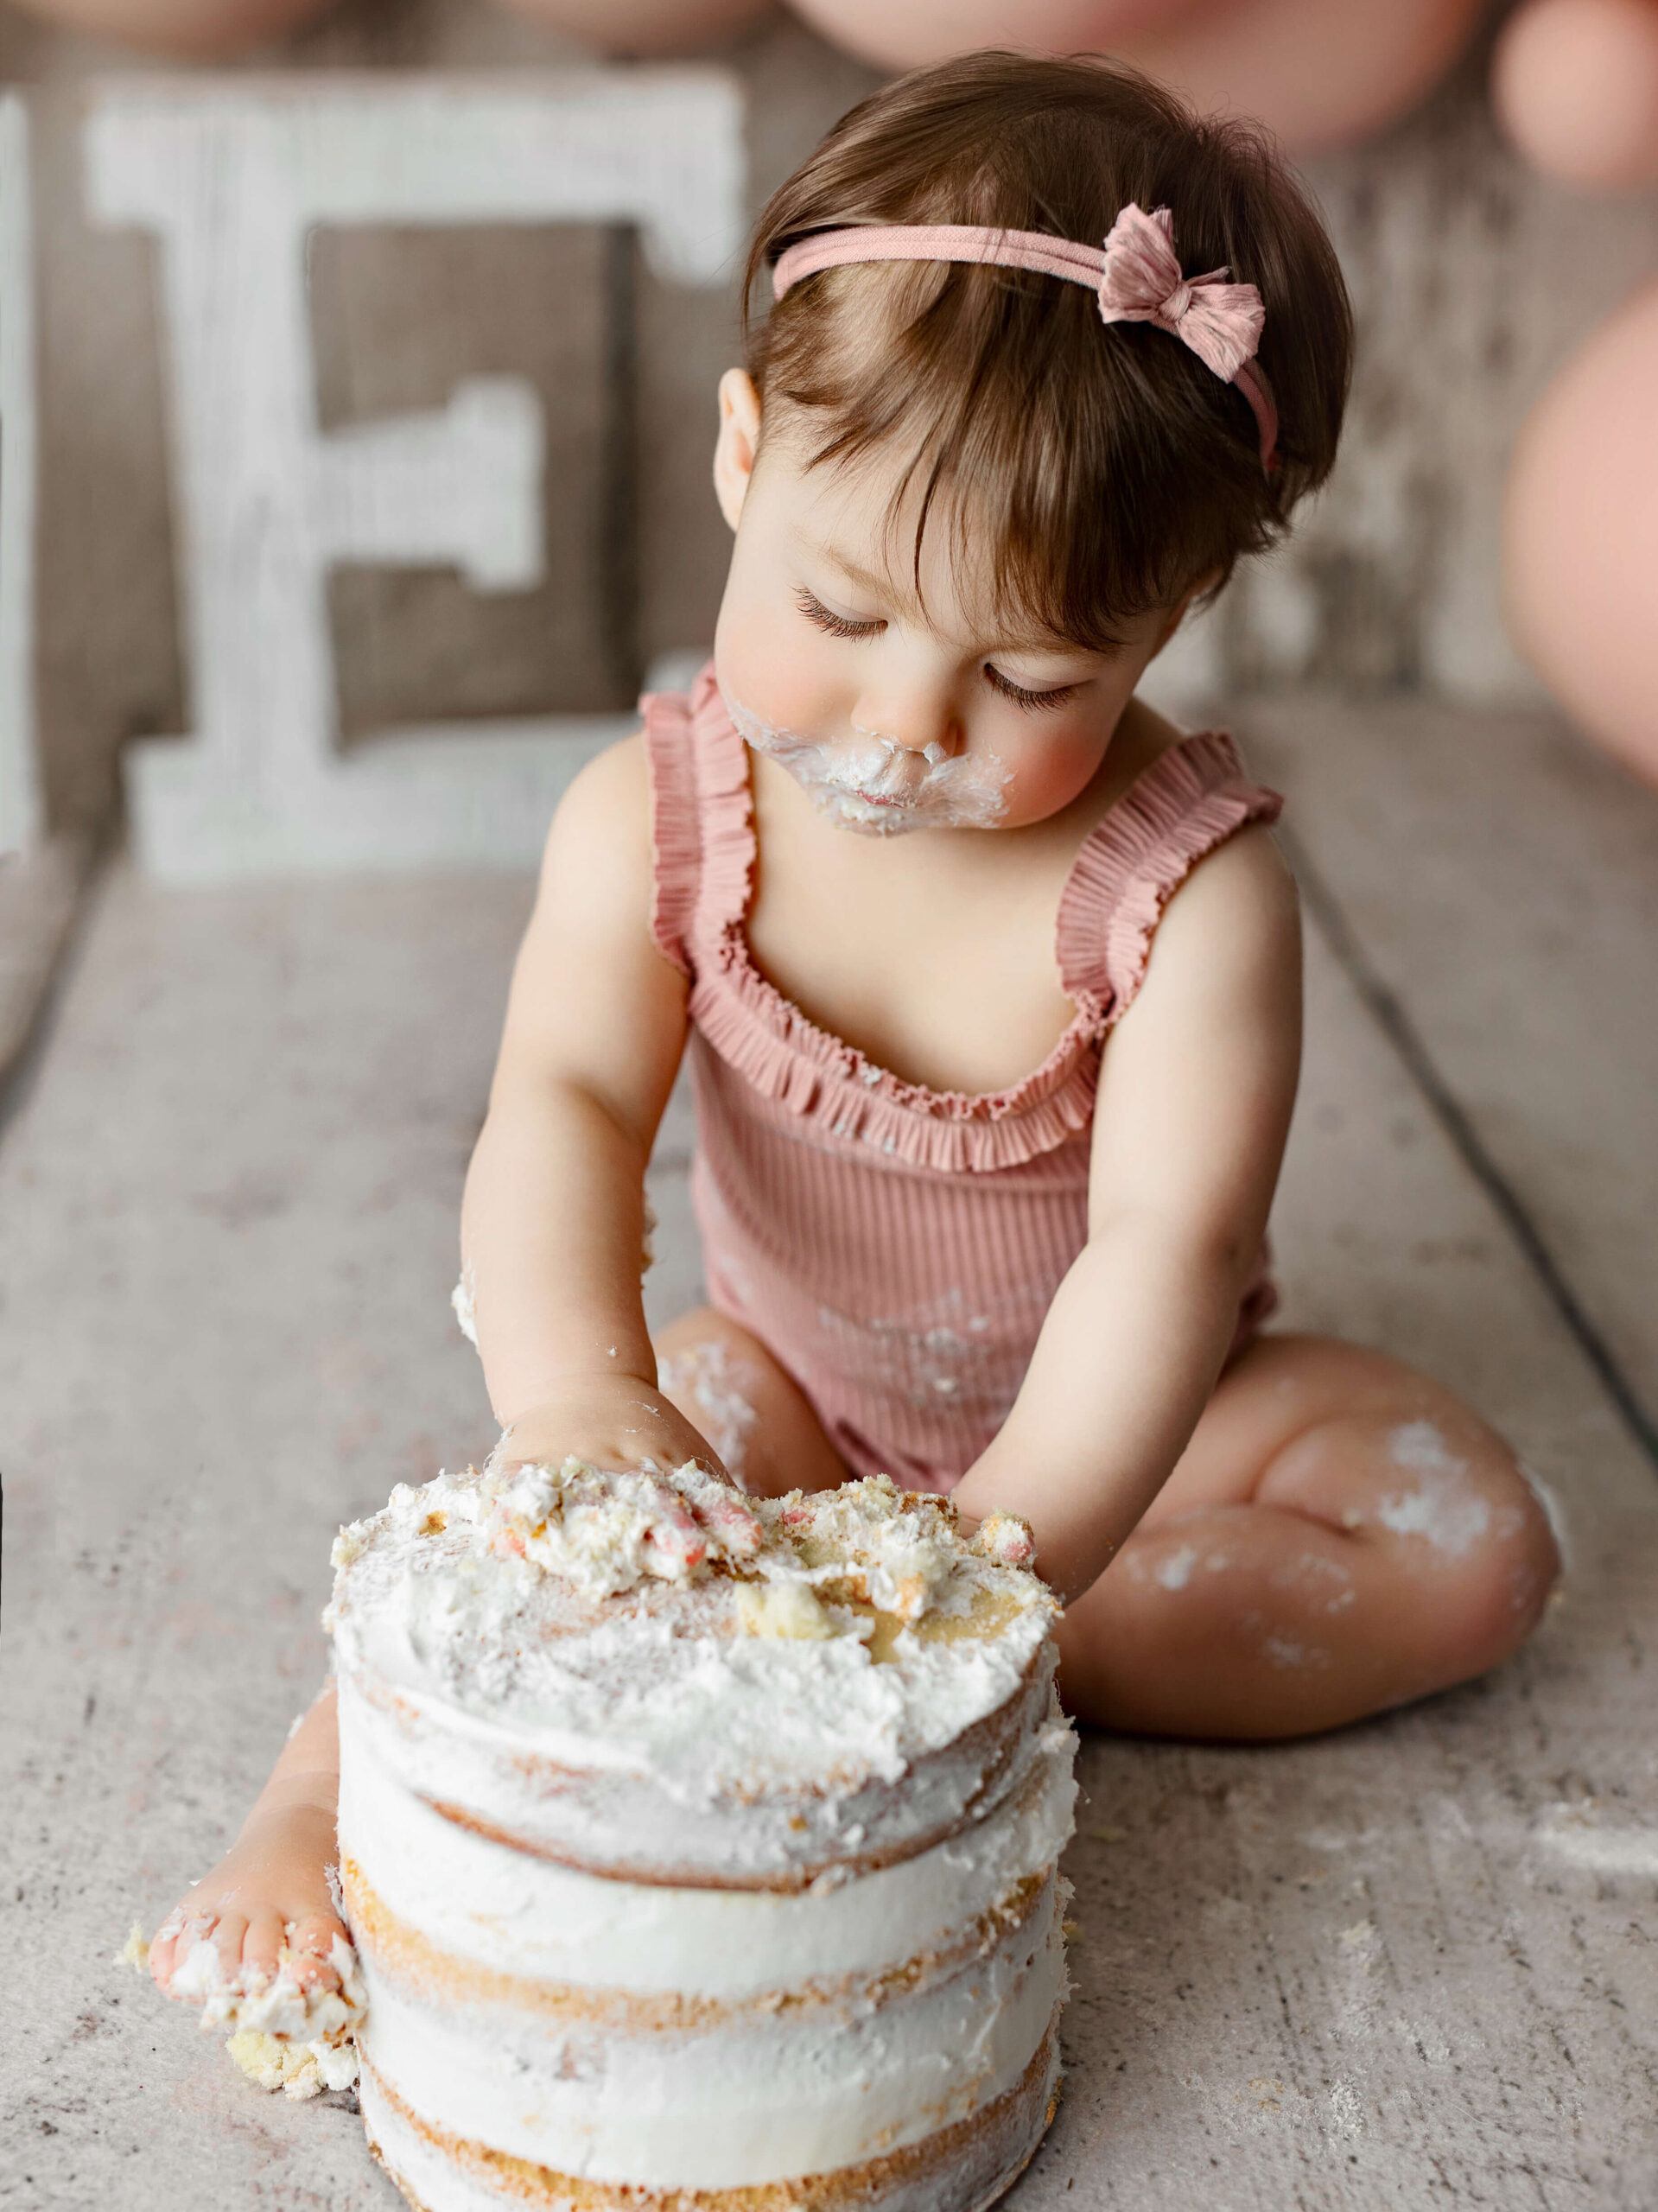 cake smash photo taken by a Loudoun VA baby photographer, one year old in a pink outfit sitting playing with her birthday cake at a milestone or cake smash baby photo shoot